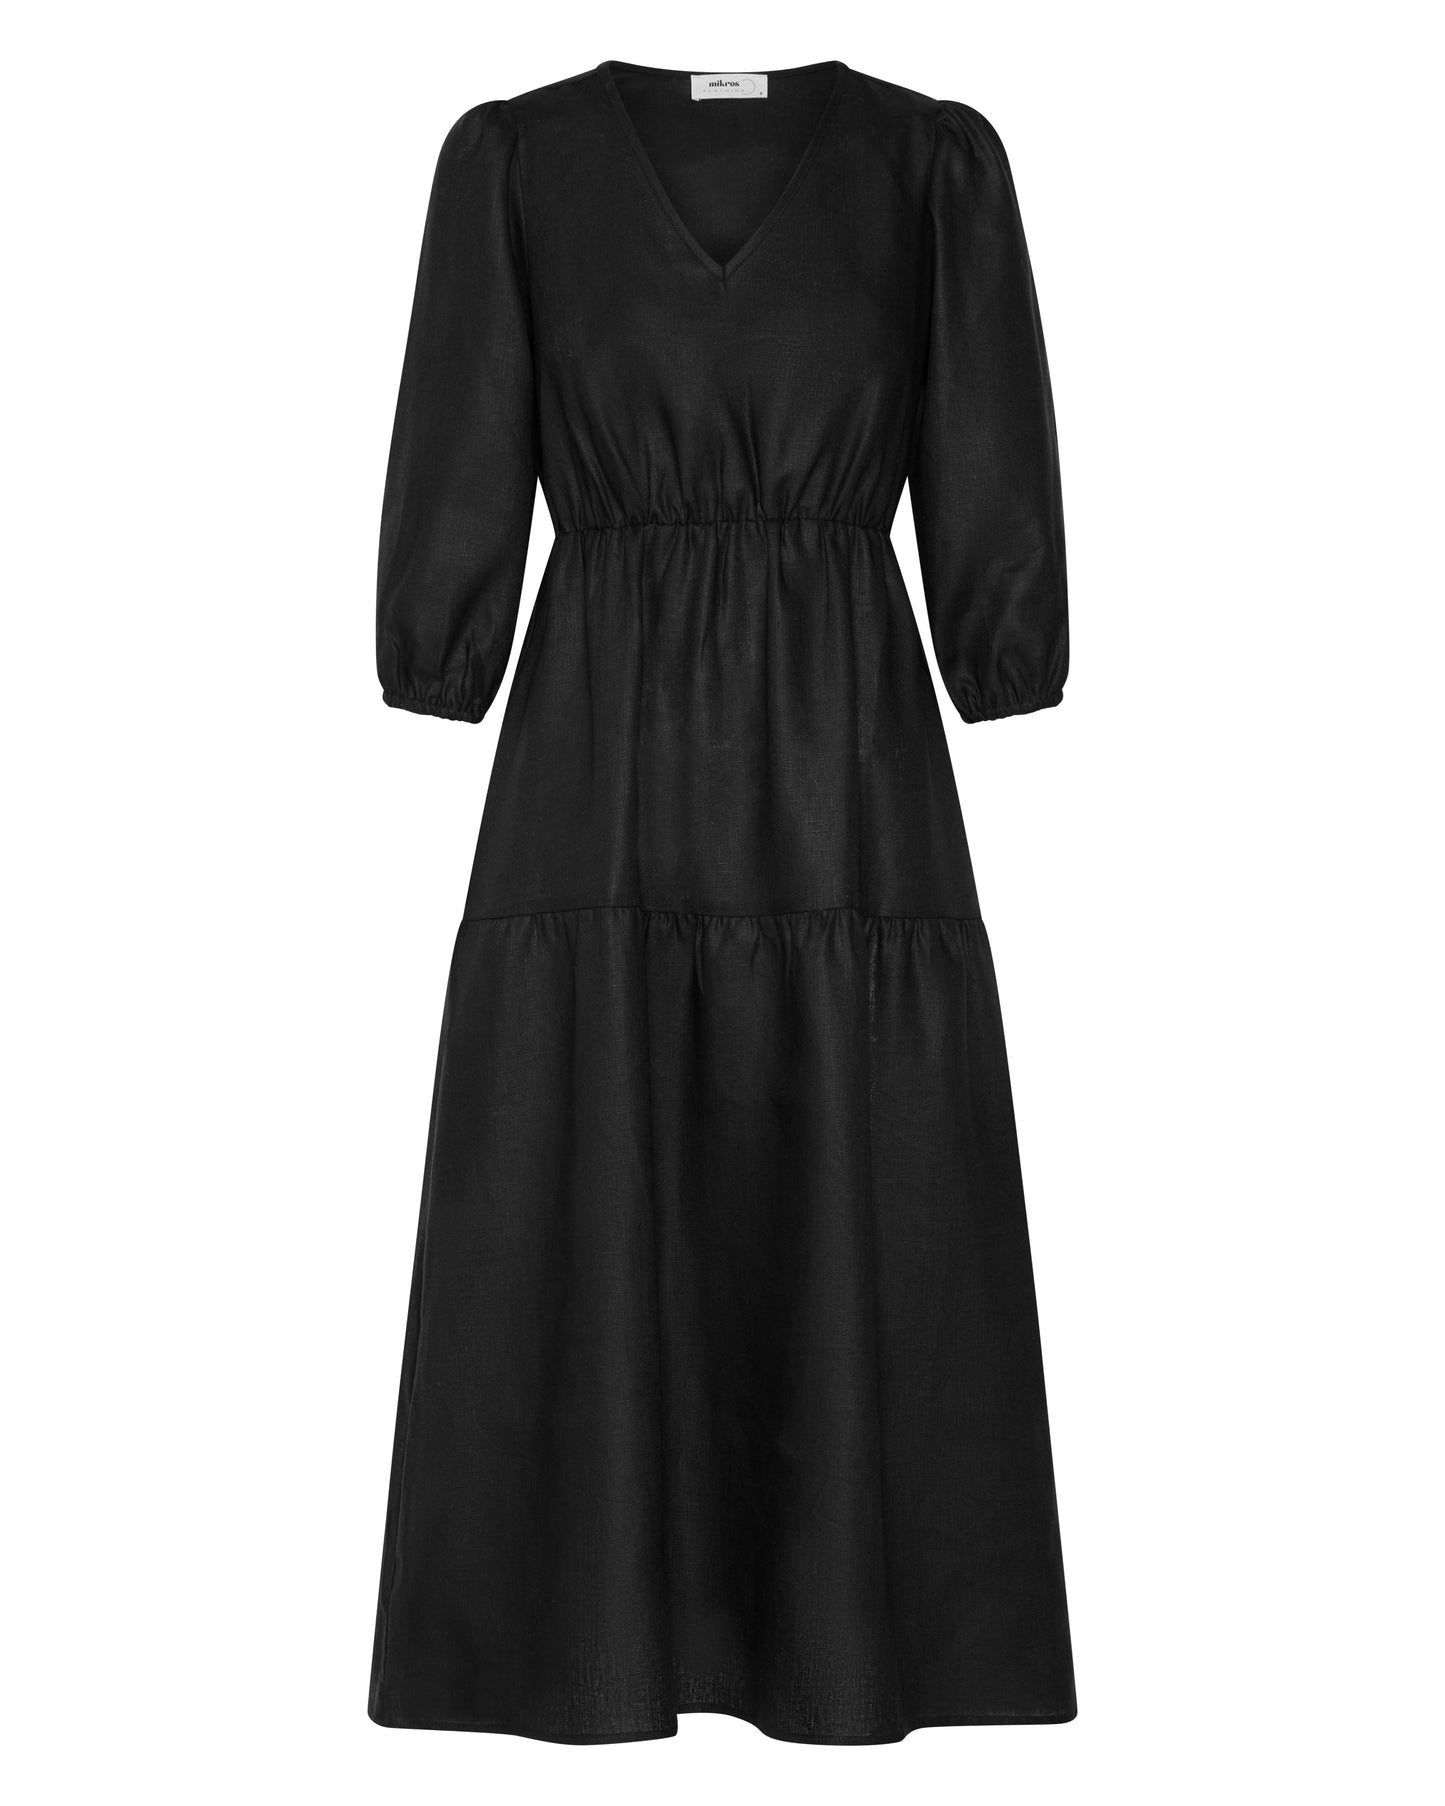 A long black linen dress, with a v neck and three quarter sleeves.